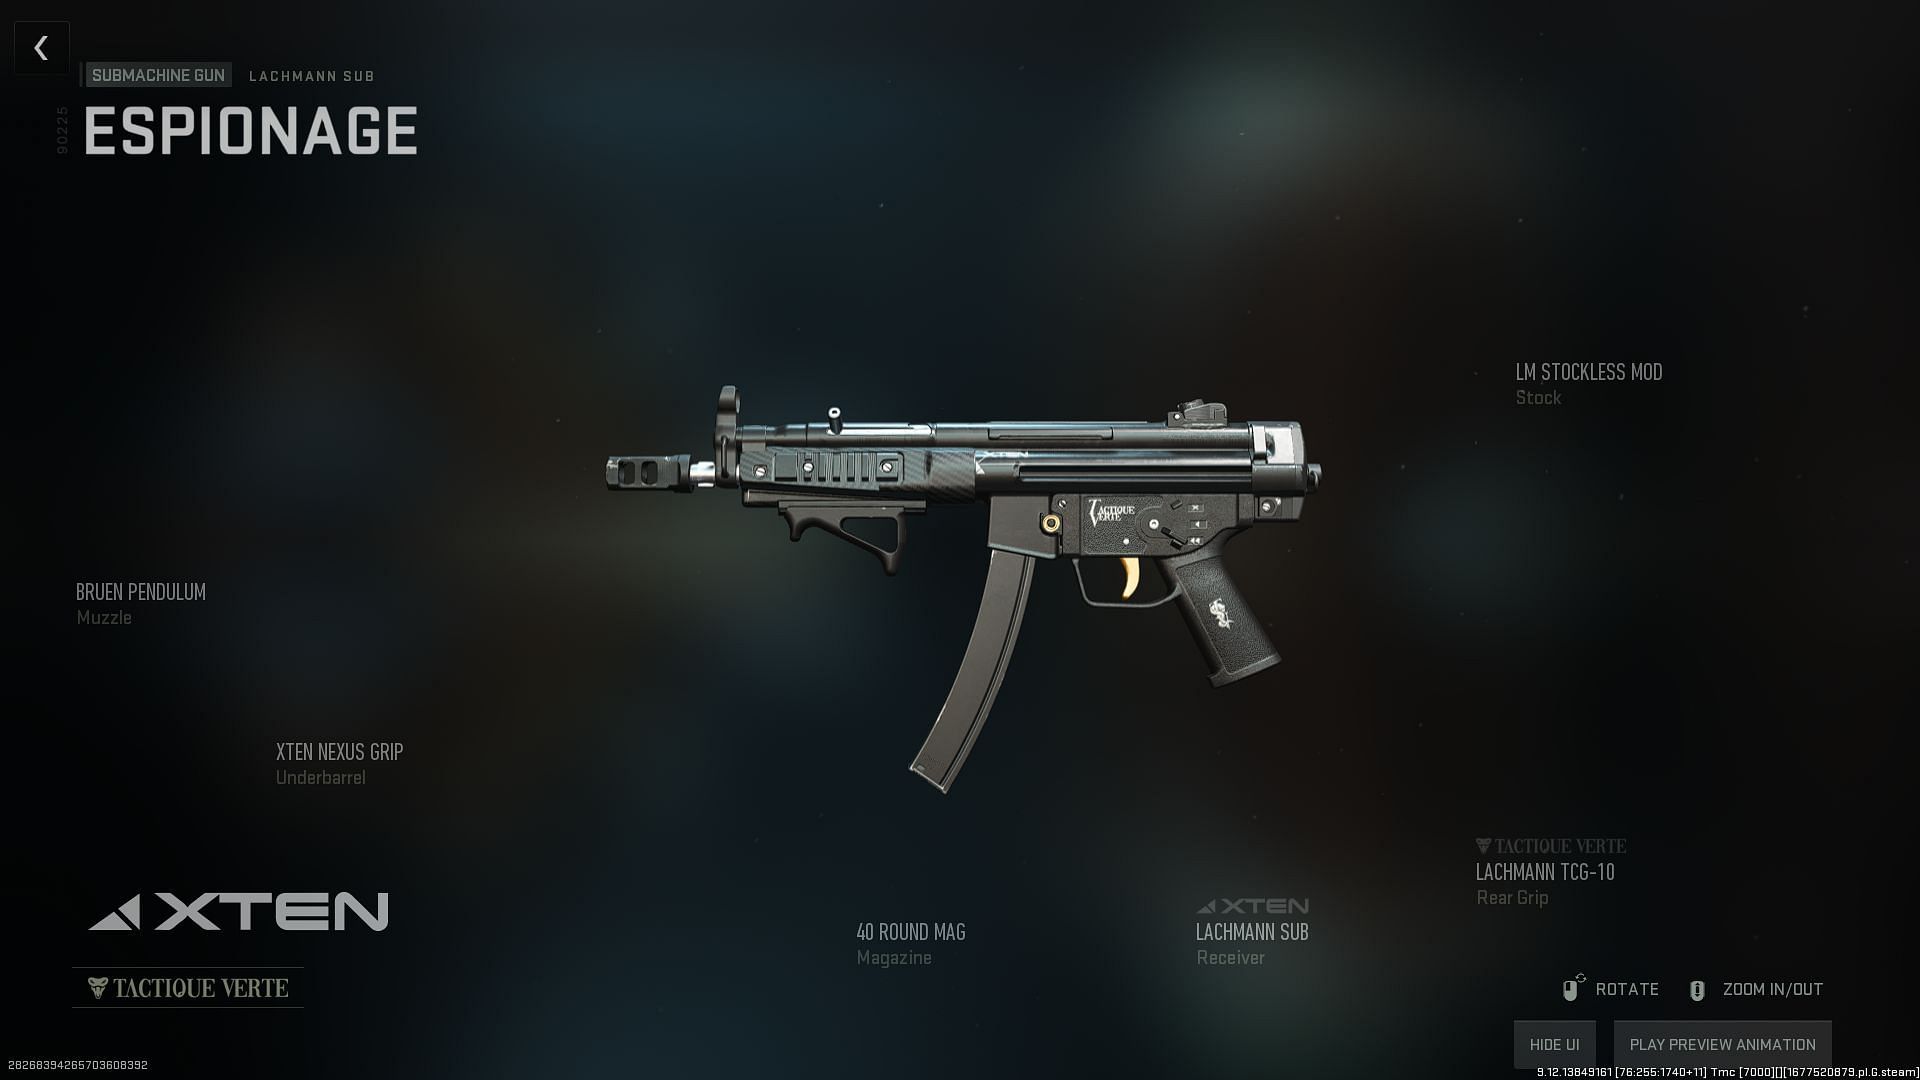 Best Lachmann Sub loadout in Modern Warfare 2 Ranked Play (Image via Activision)